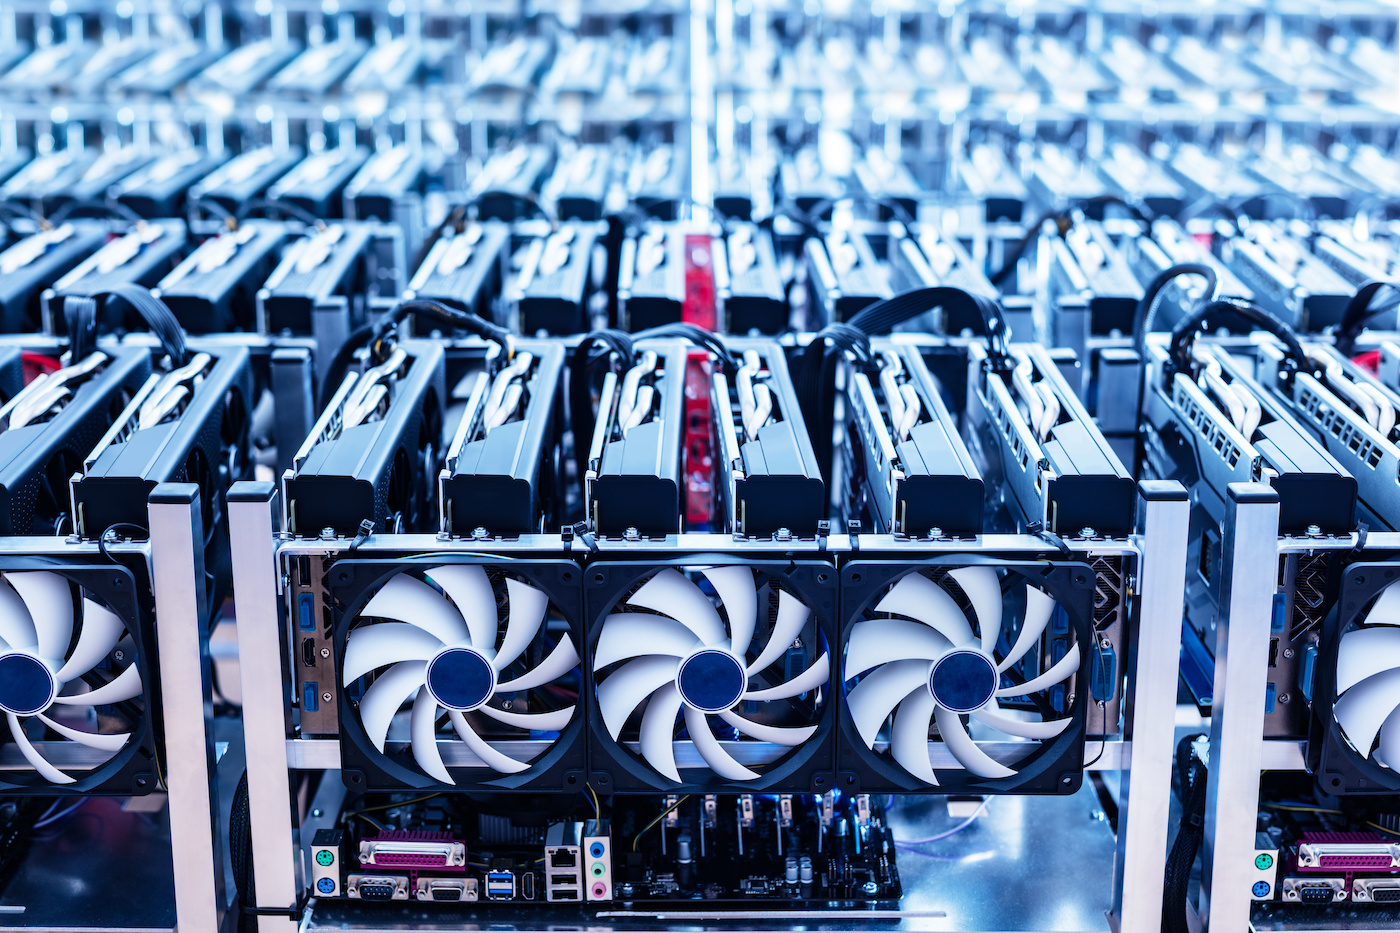 Best mining rigs and mining PCs for Bitcoin, Ethereum and more | TechRadar